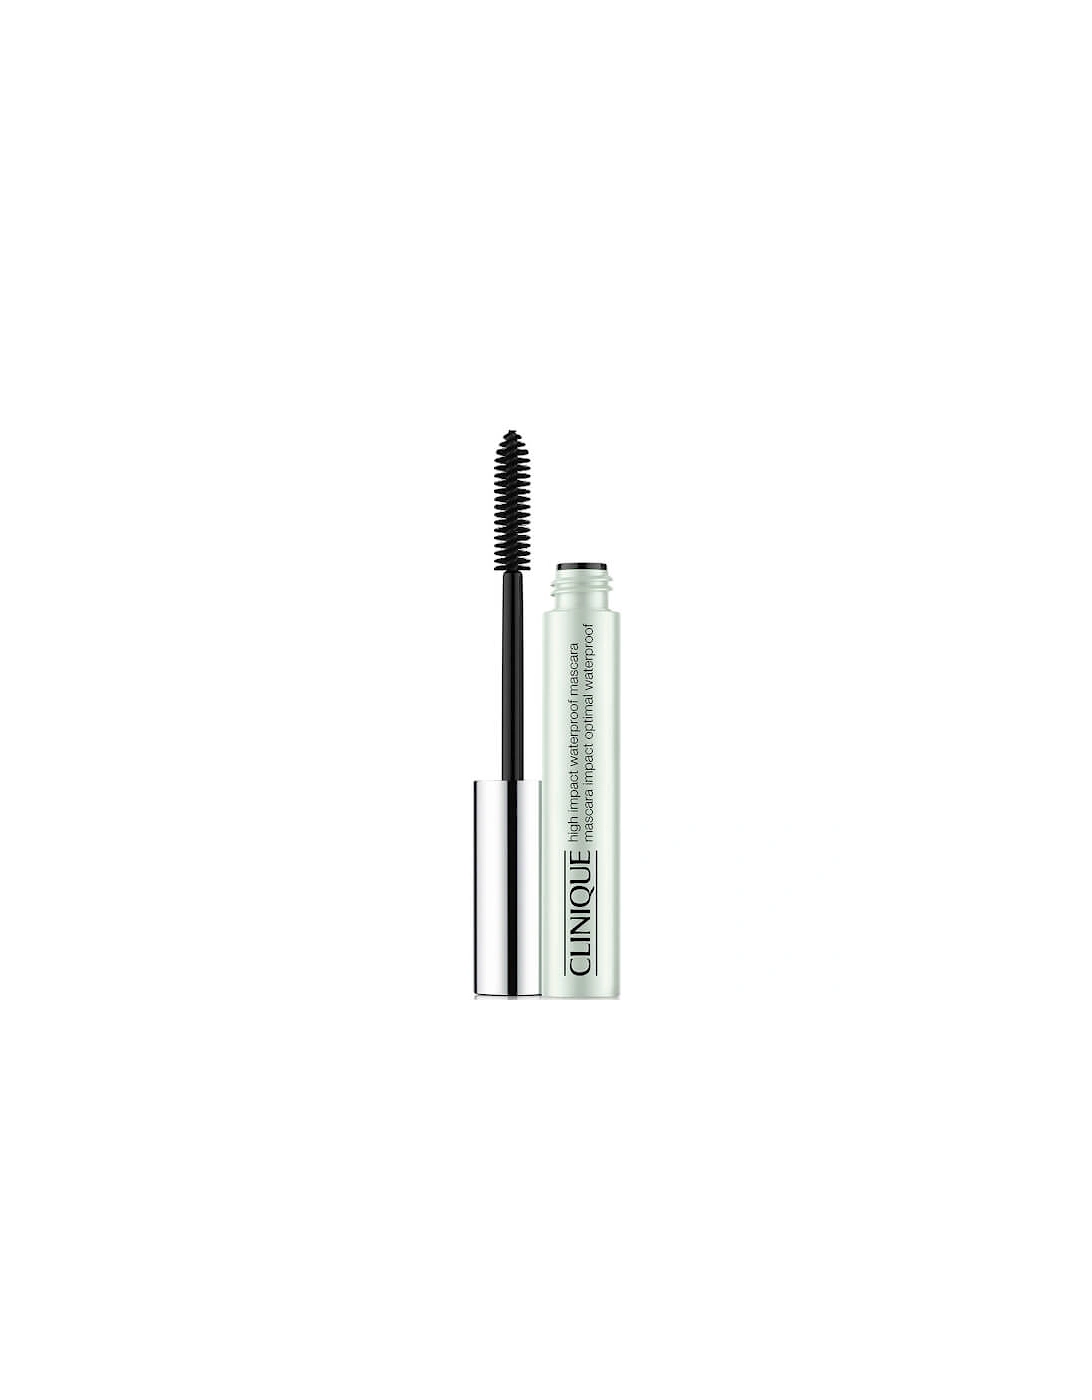 High Impact Waterproof Mascara - Black/Brown 10g - Clinique, 2 of 1